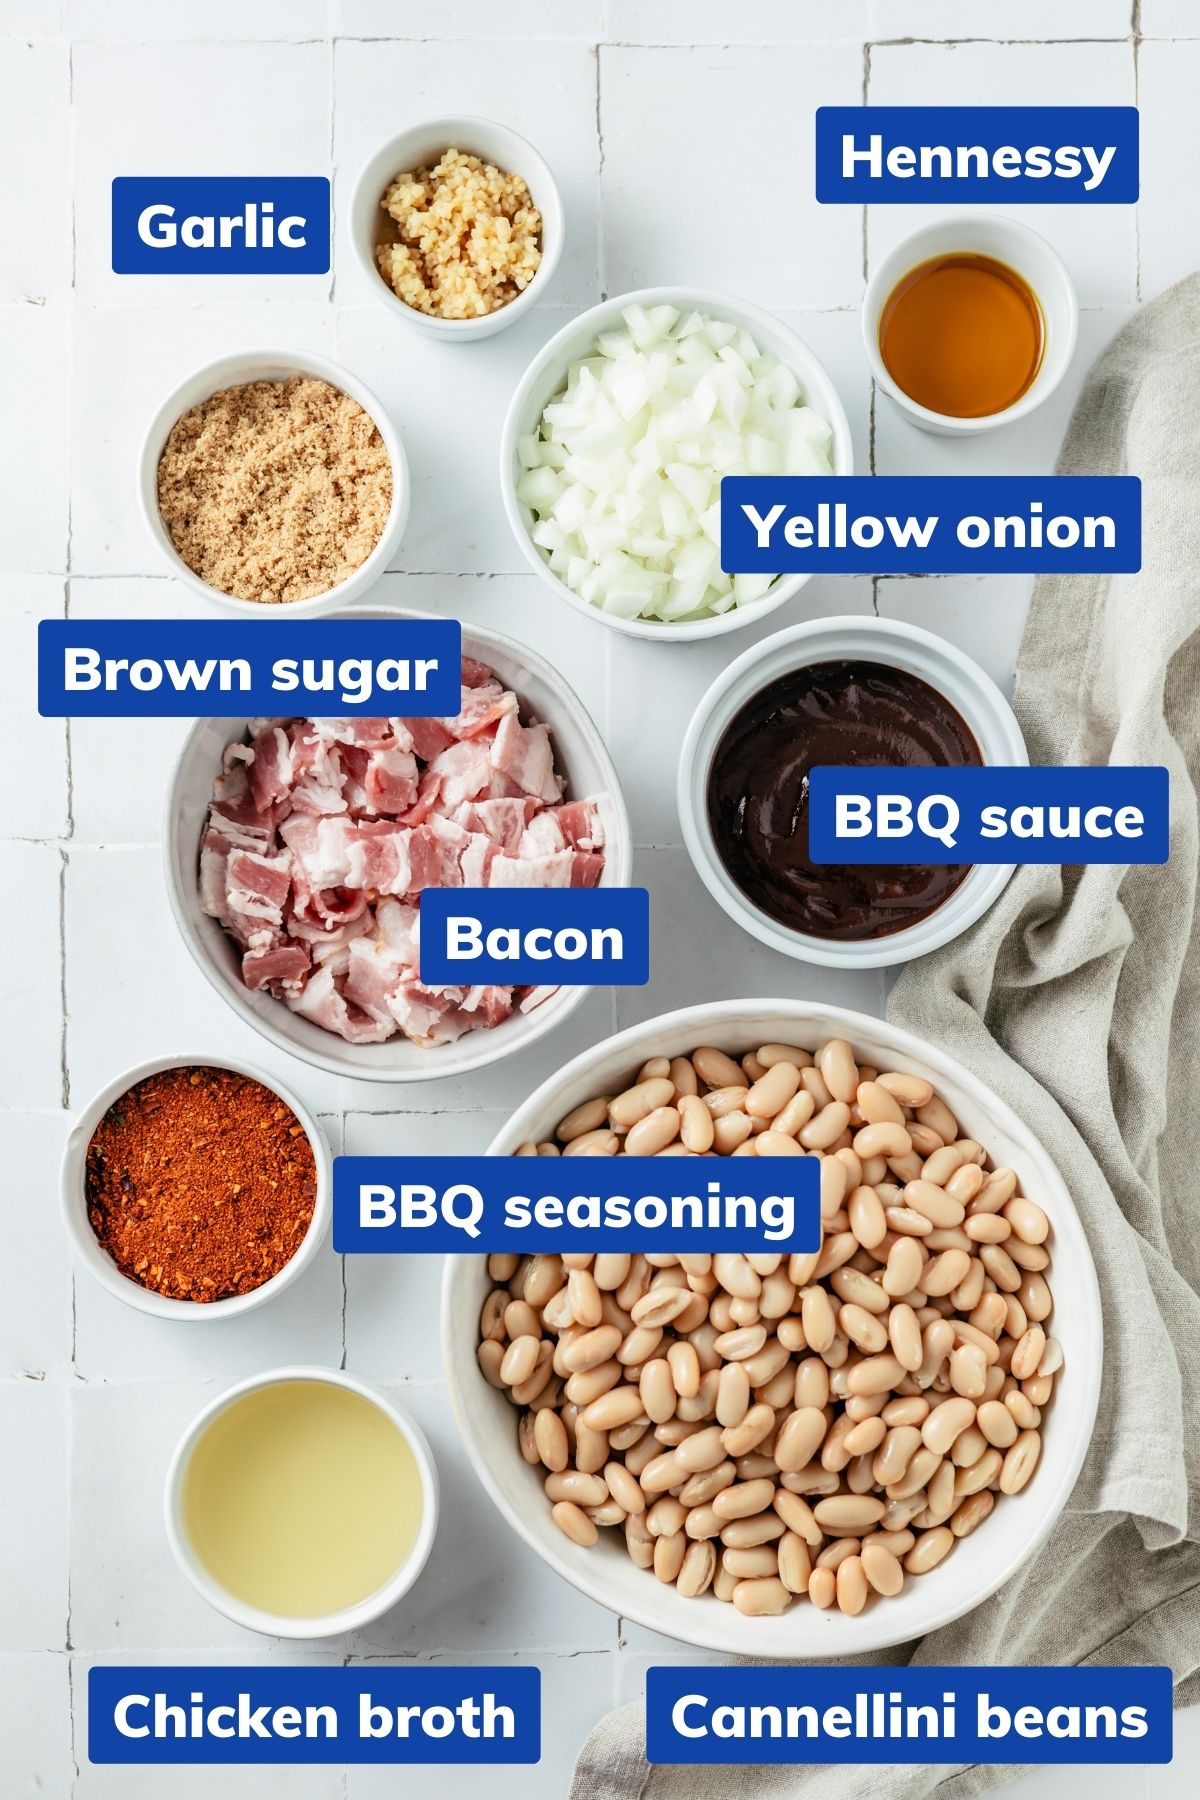 Key ingredients for Slow Cooker Baked Beans artfully displayed in separate bowls: bacon strips, diced yellow onion, minced garlic cloves, cannellini beans, low-sodium chicken broth, BBQ seasoning, hickory or Kansas City style BBQ sauce, brown sugar, and a touch of Hennessy for a flavorful touch